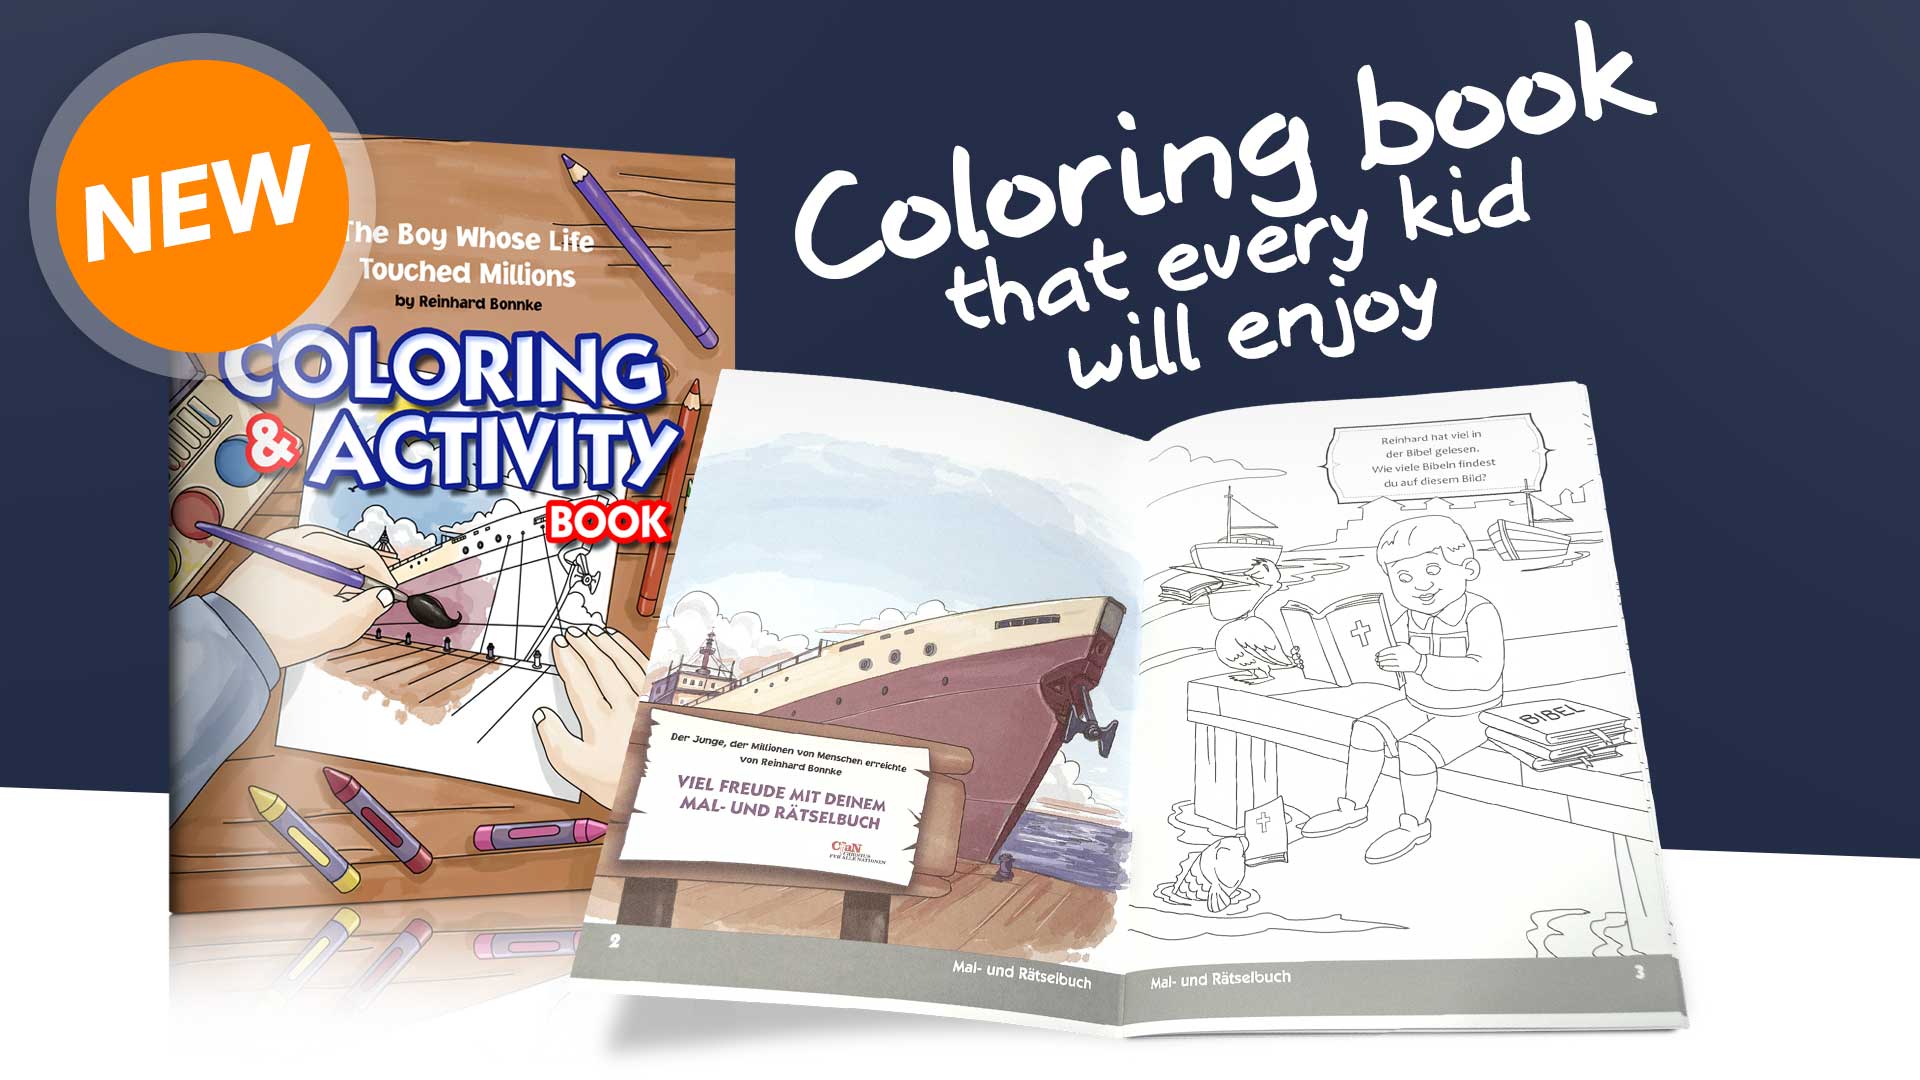 Colorbook - The Boy Whose Life touched Millions by Reinhard Bonnke